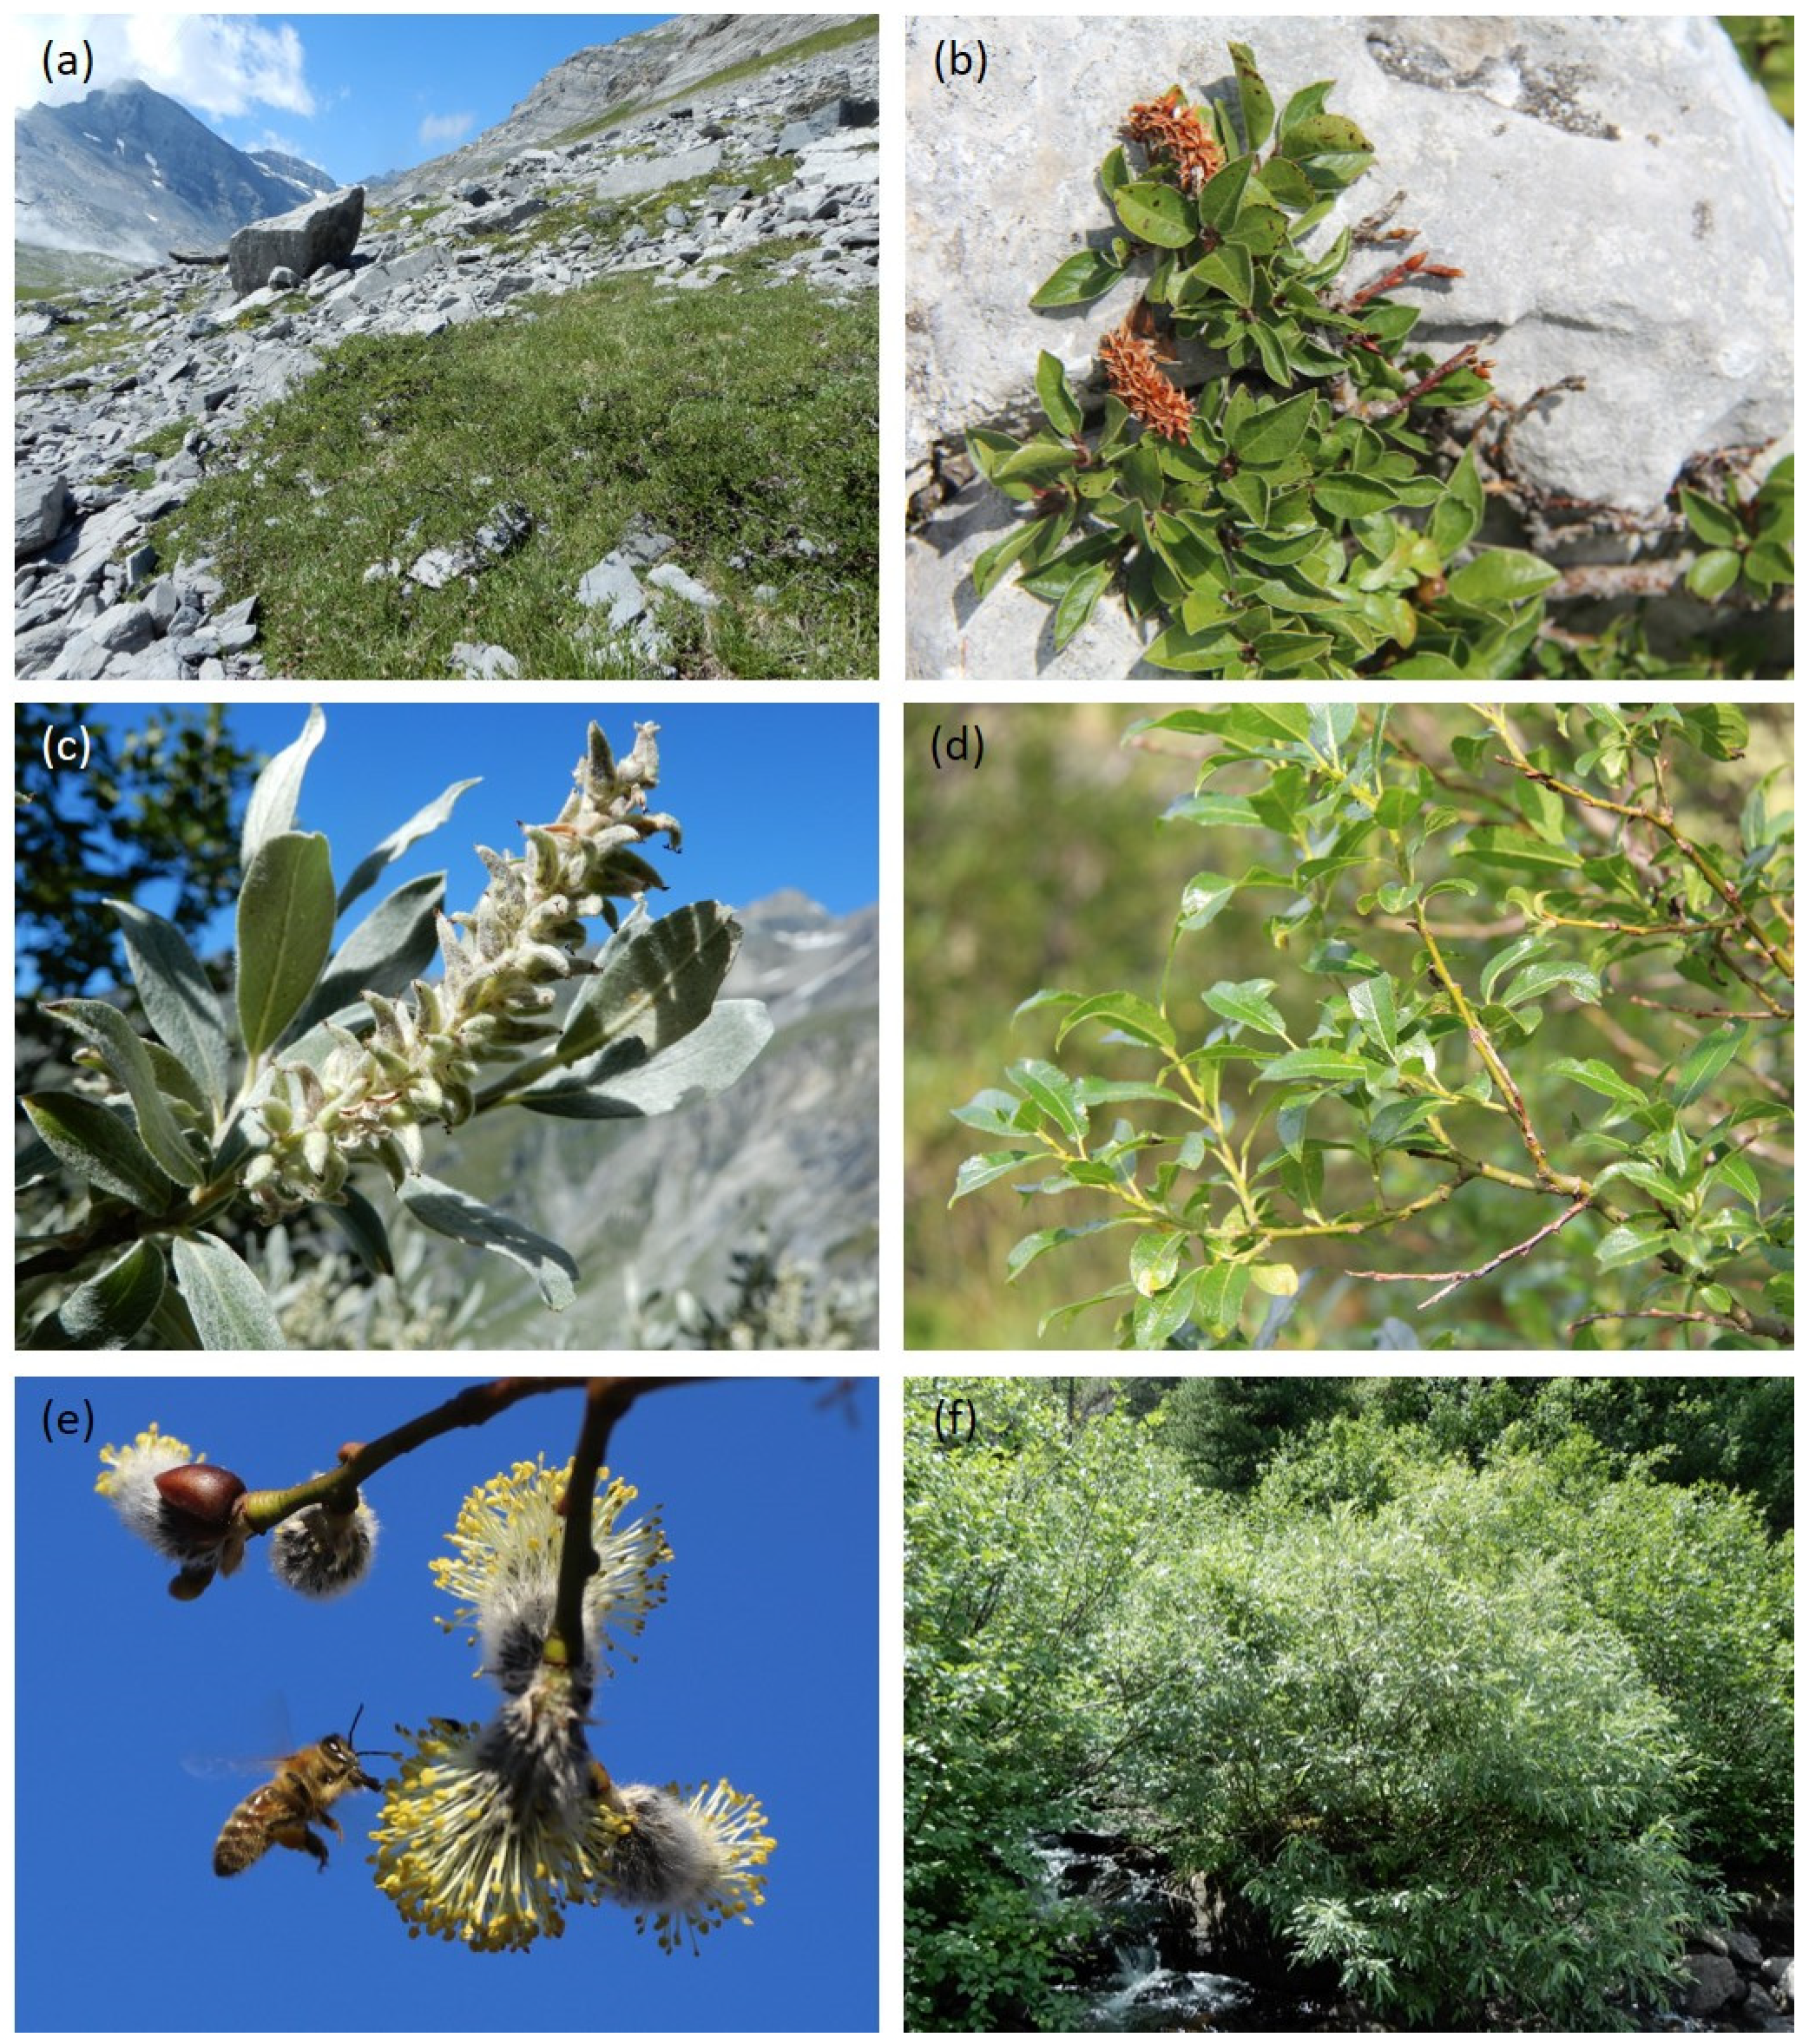 Diversity | Free Full-Text | The Evolutionary History, Diversity, and  Ecology of Willows (Salix L.) in the European Alps